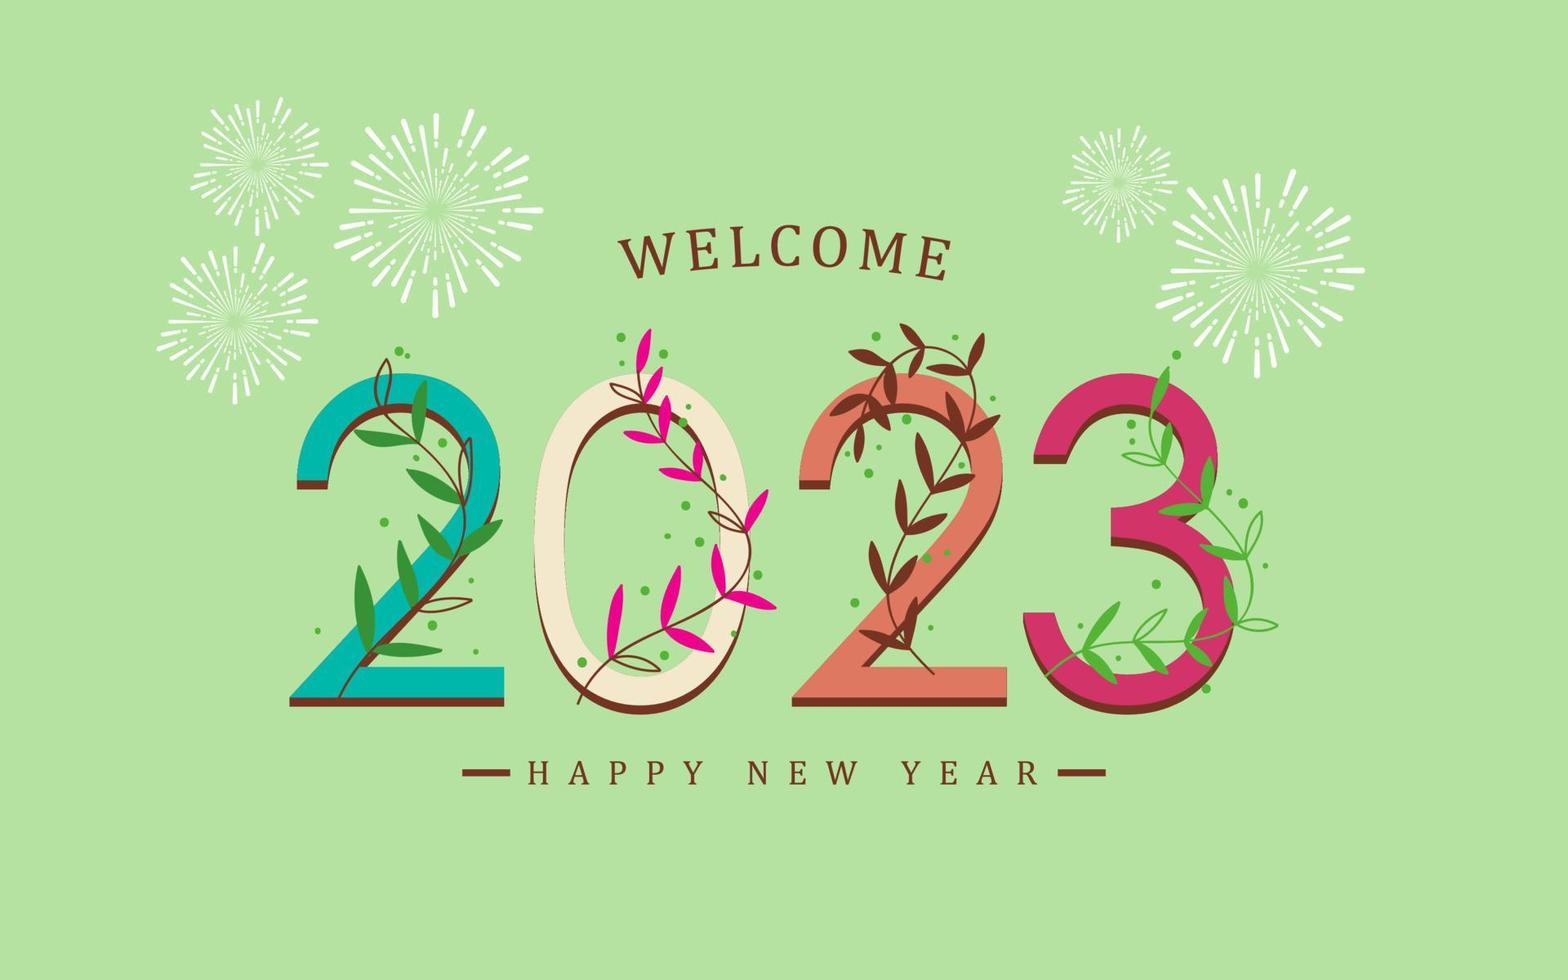 welcome new year 2023 with leaf ornament aesthetic vector design background